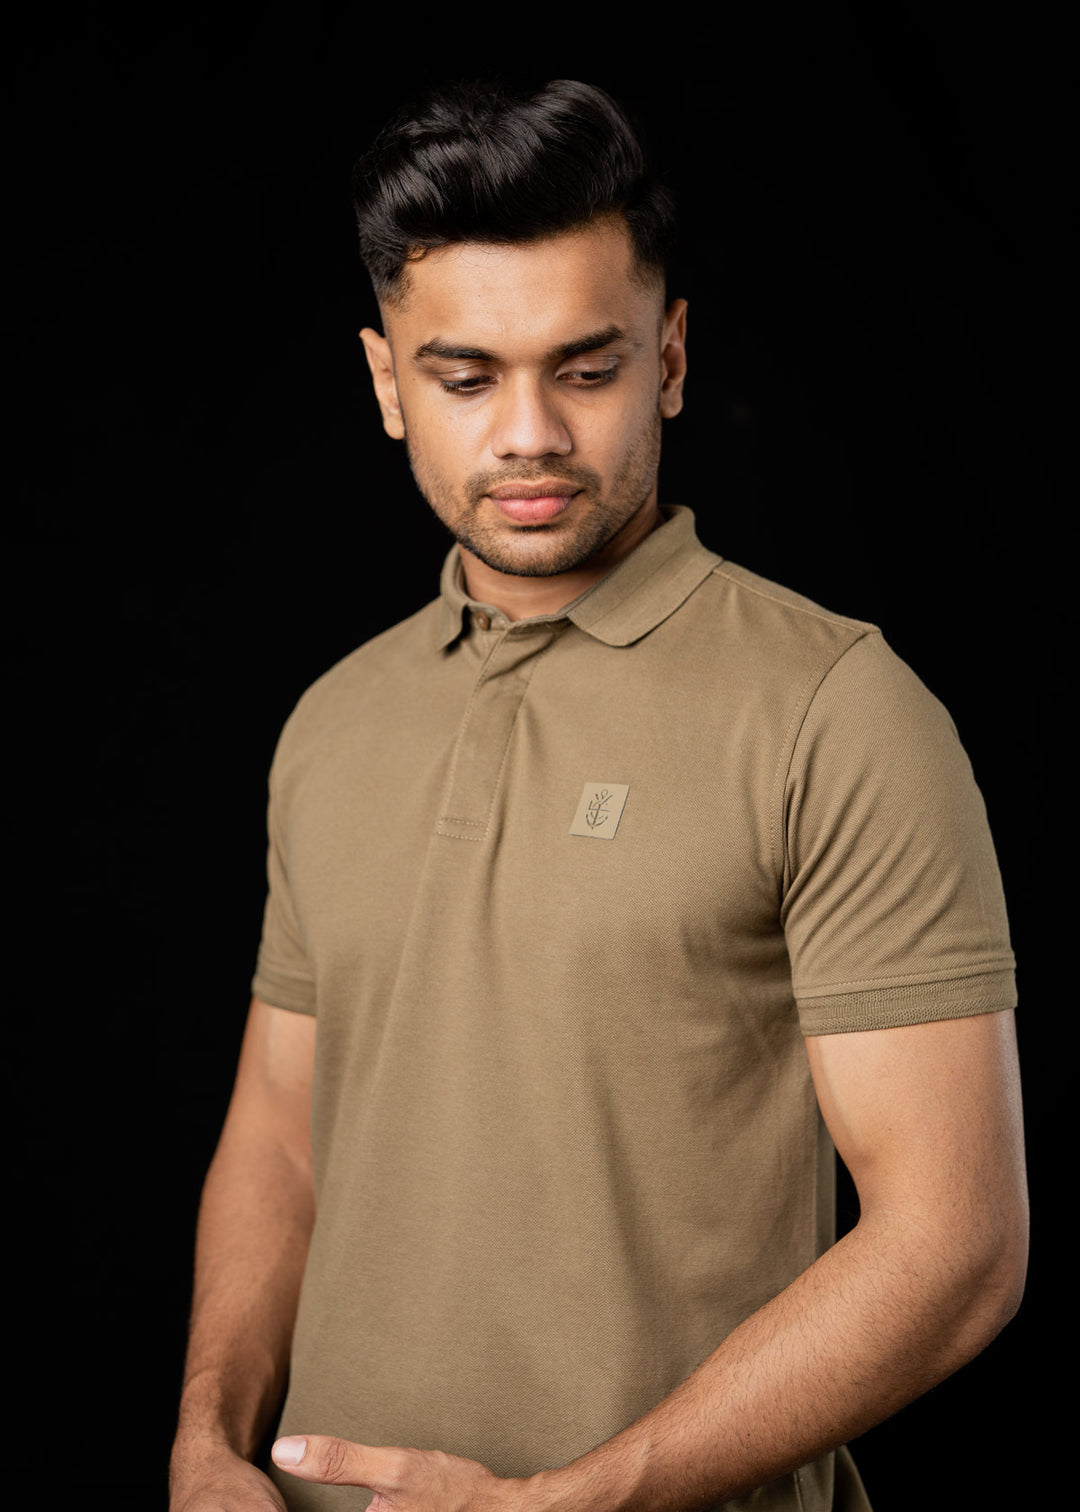 Elevated Summer Jacquard Premium Polo LCY